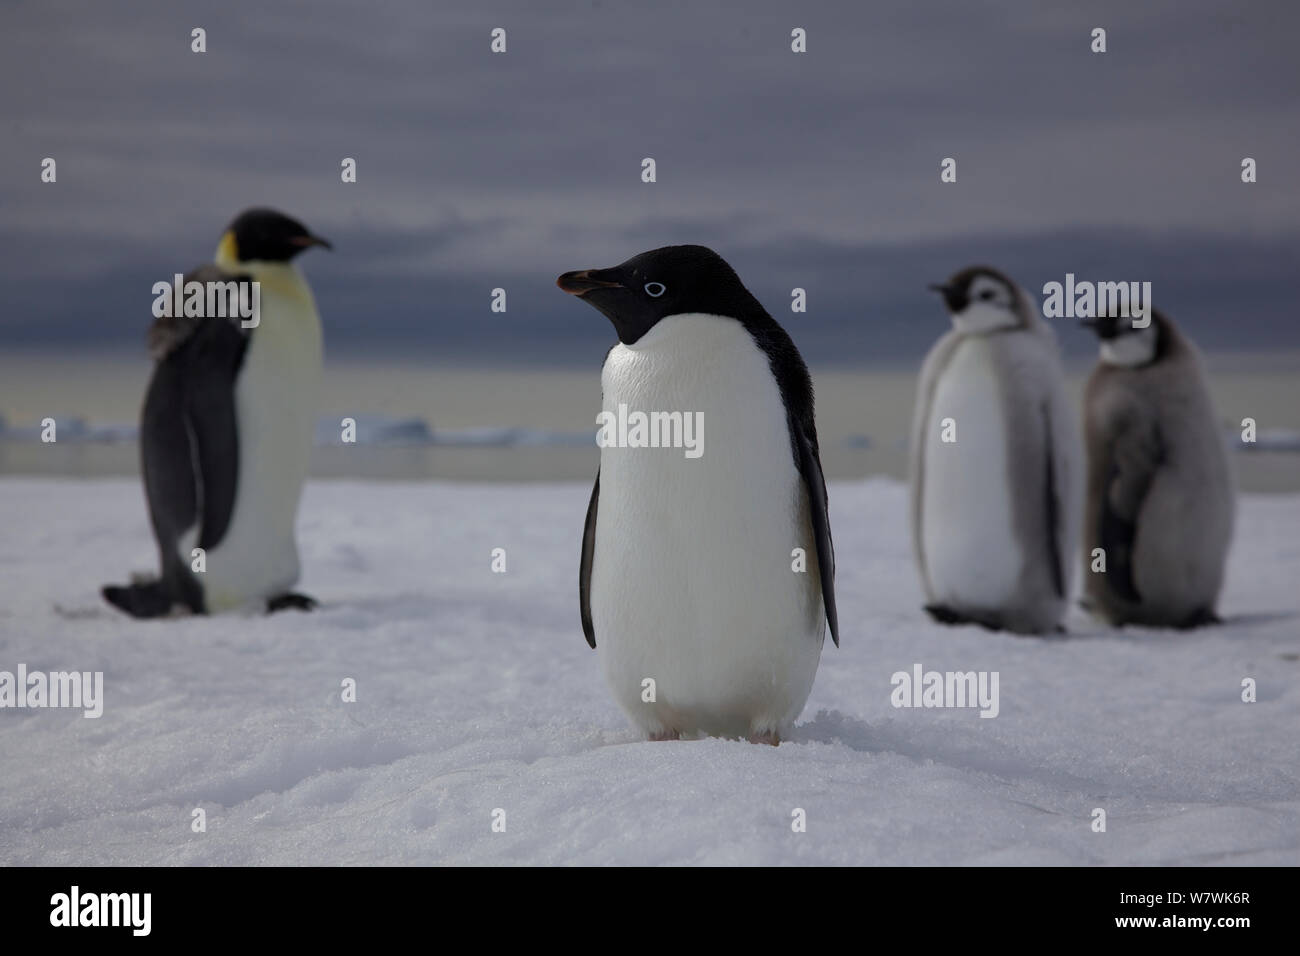 Adelie penguin (Pygoscelis adeliae) with Emperor penguin (Aptenodytes forsteri) adult and two chicks behind, Antarctica, January. Stock Photo